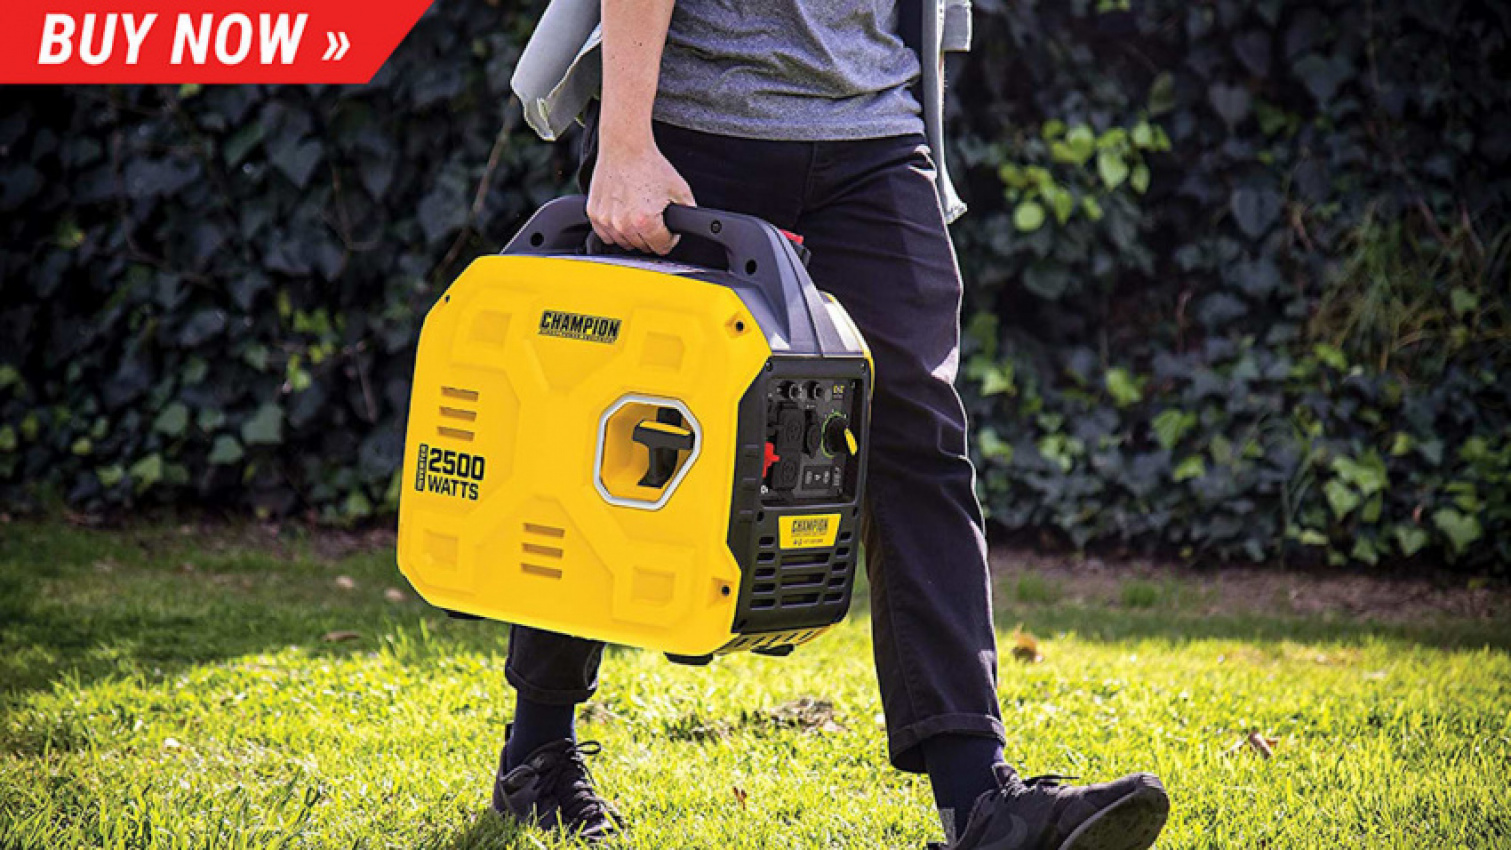 autos, cars, amazon, commerce, amazon, this portable champion generator is nearly $300 off for a limited time